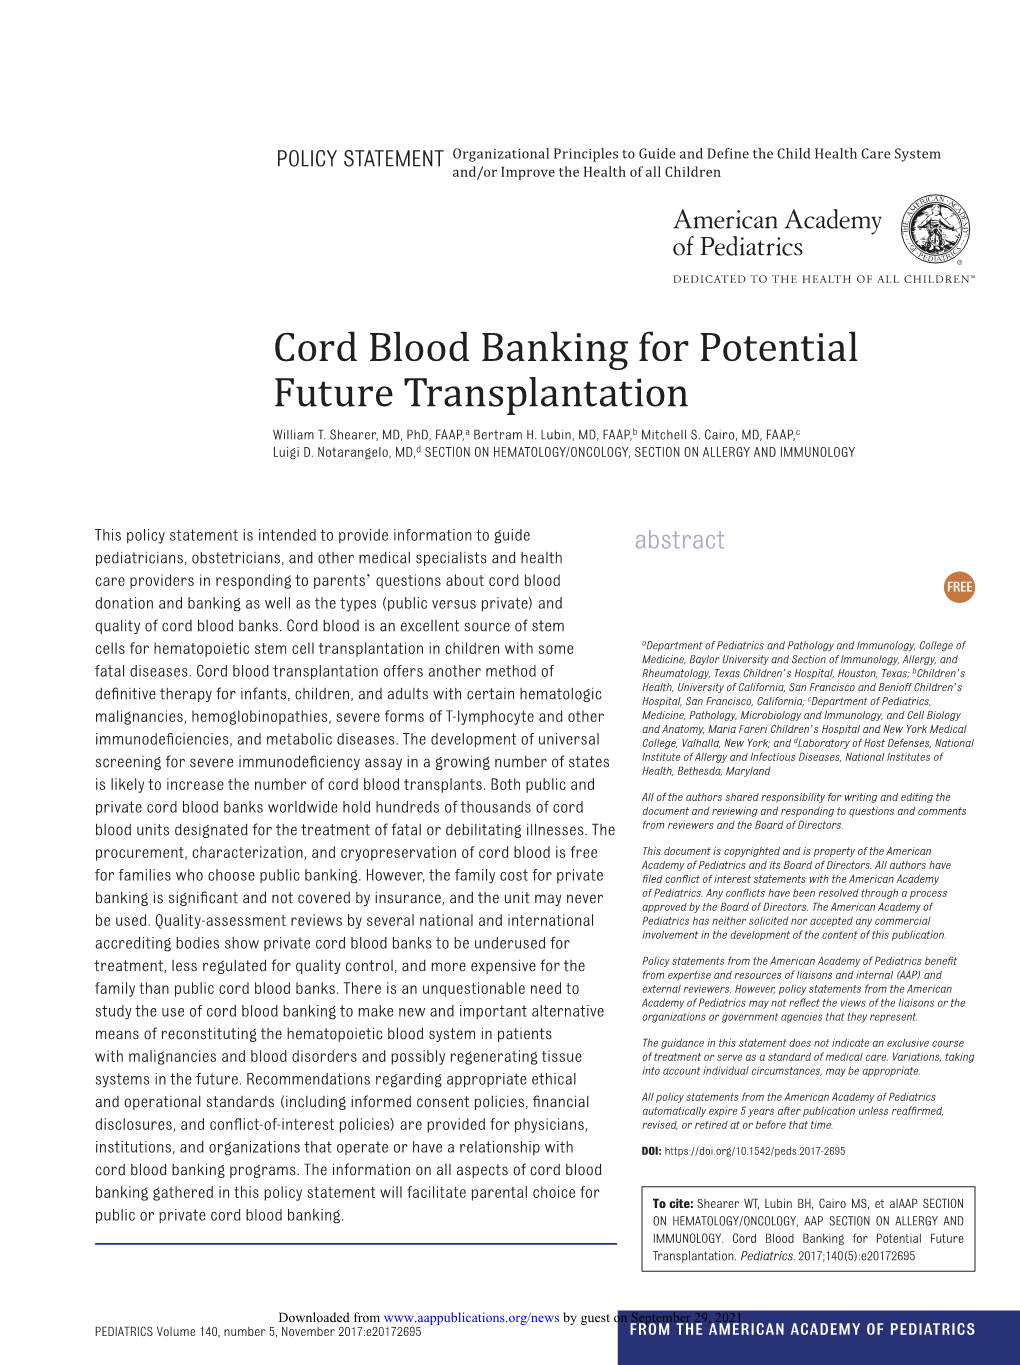 Cord Blood Banking for Potential Future Transplantation